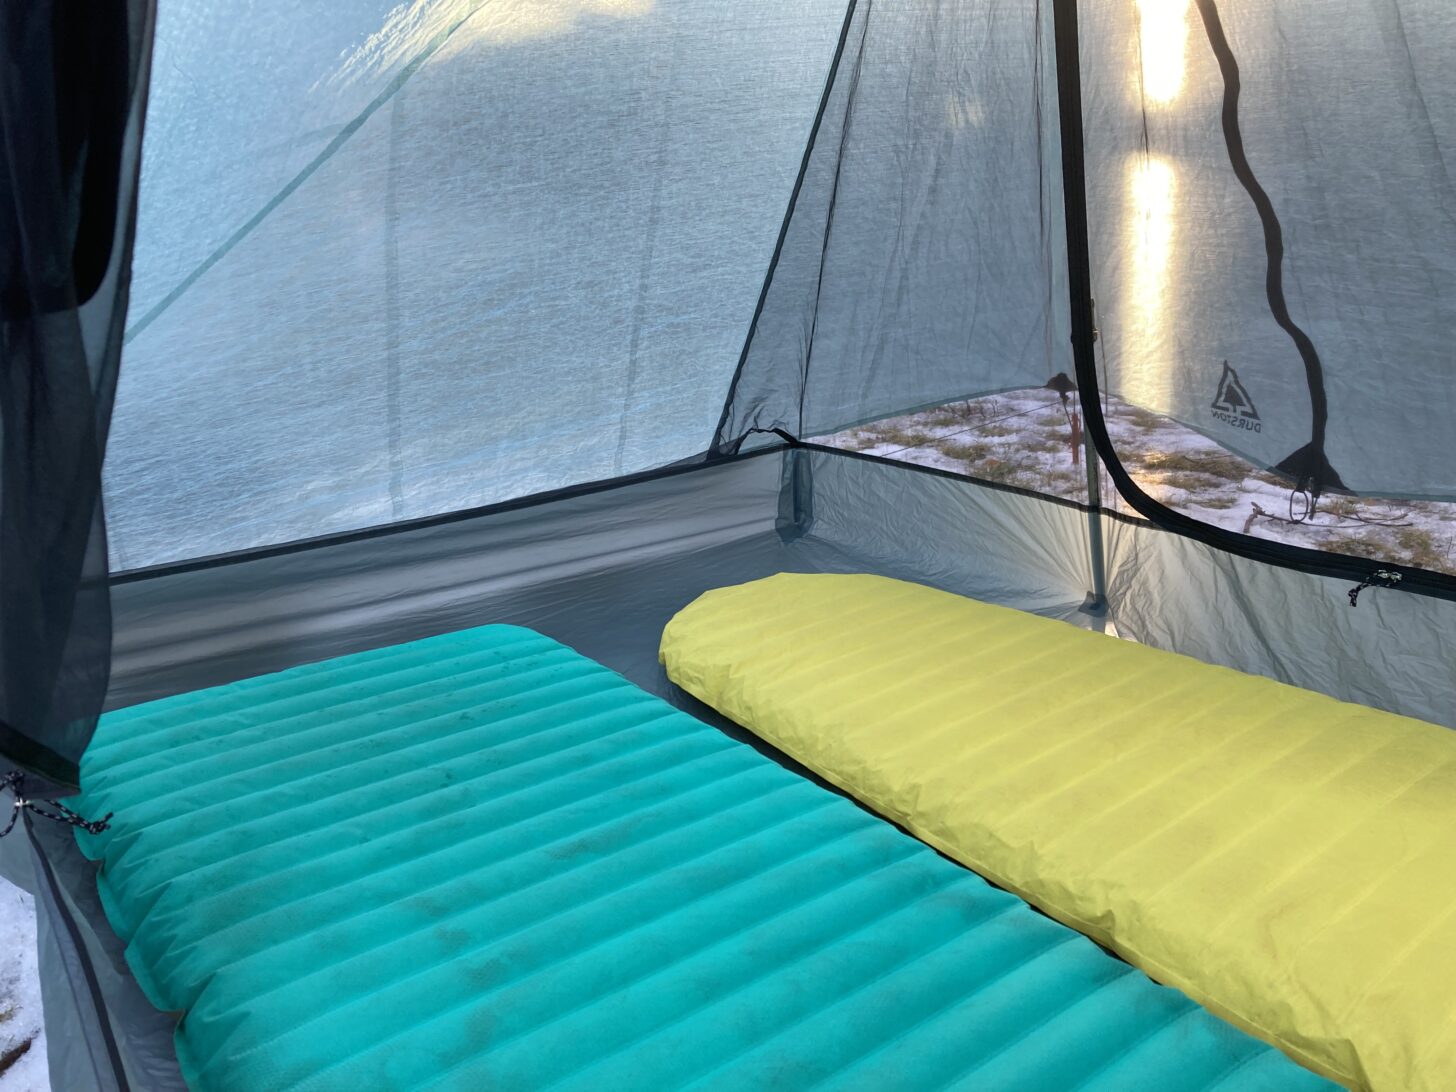 Two sleeping pads are shown inside a tent.